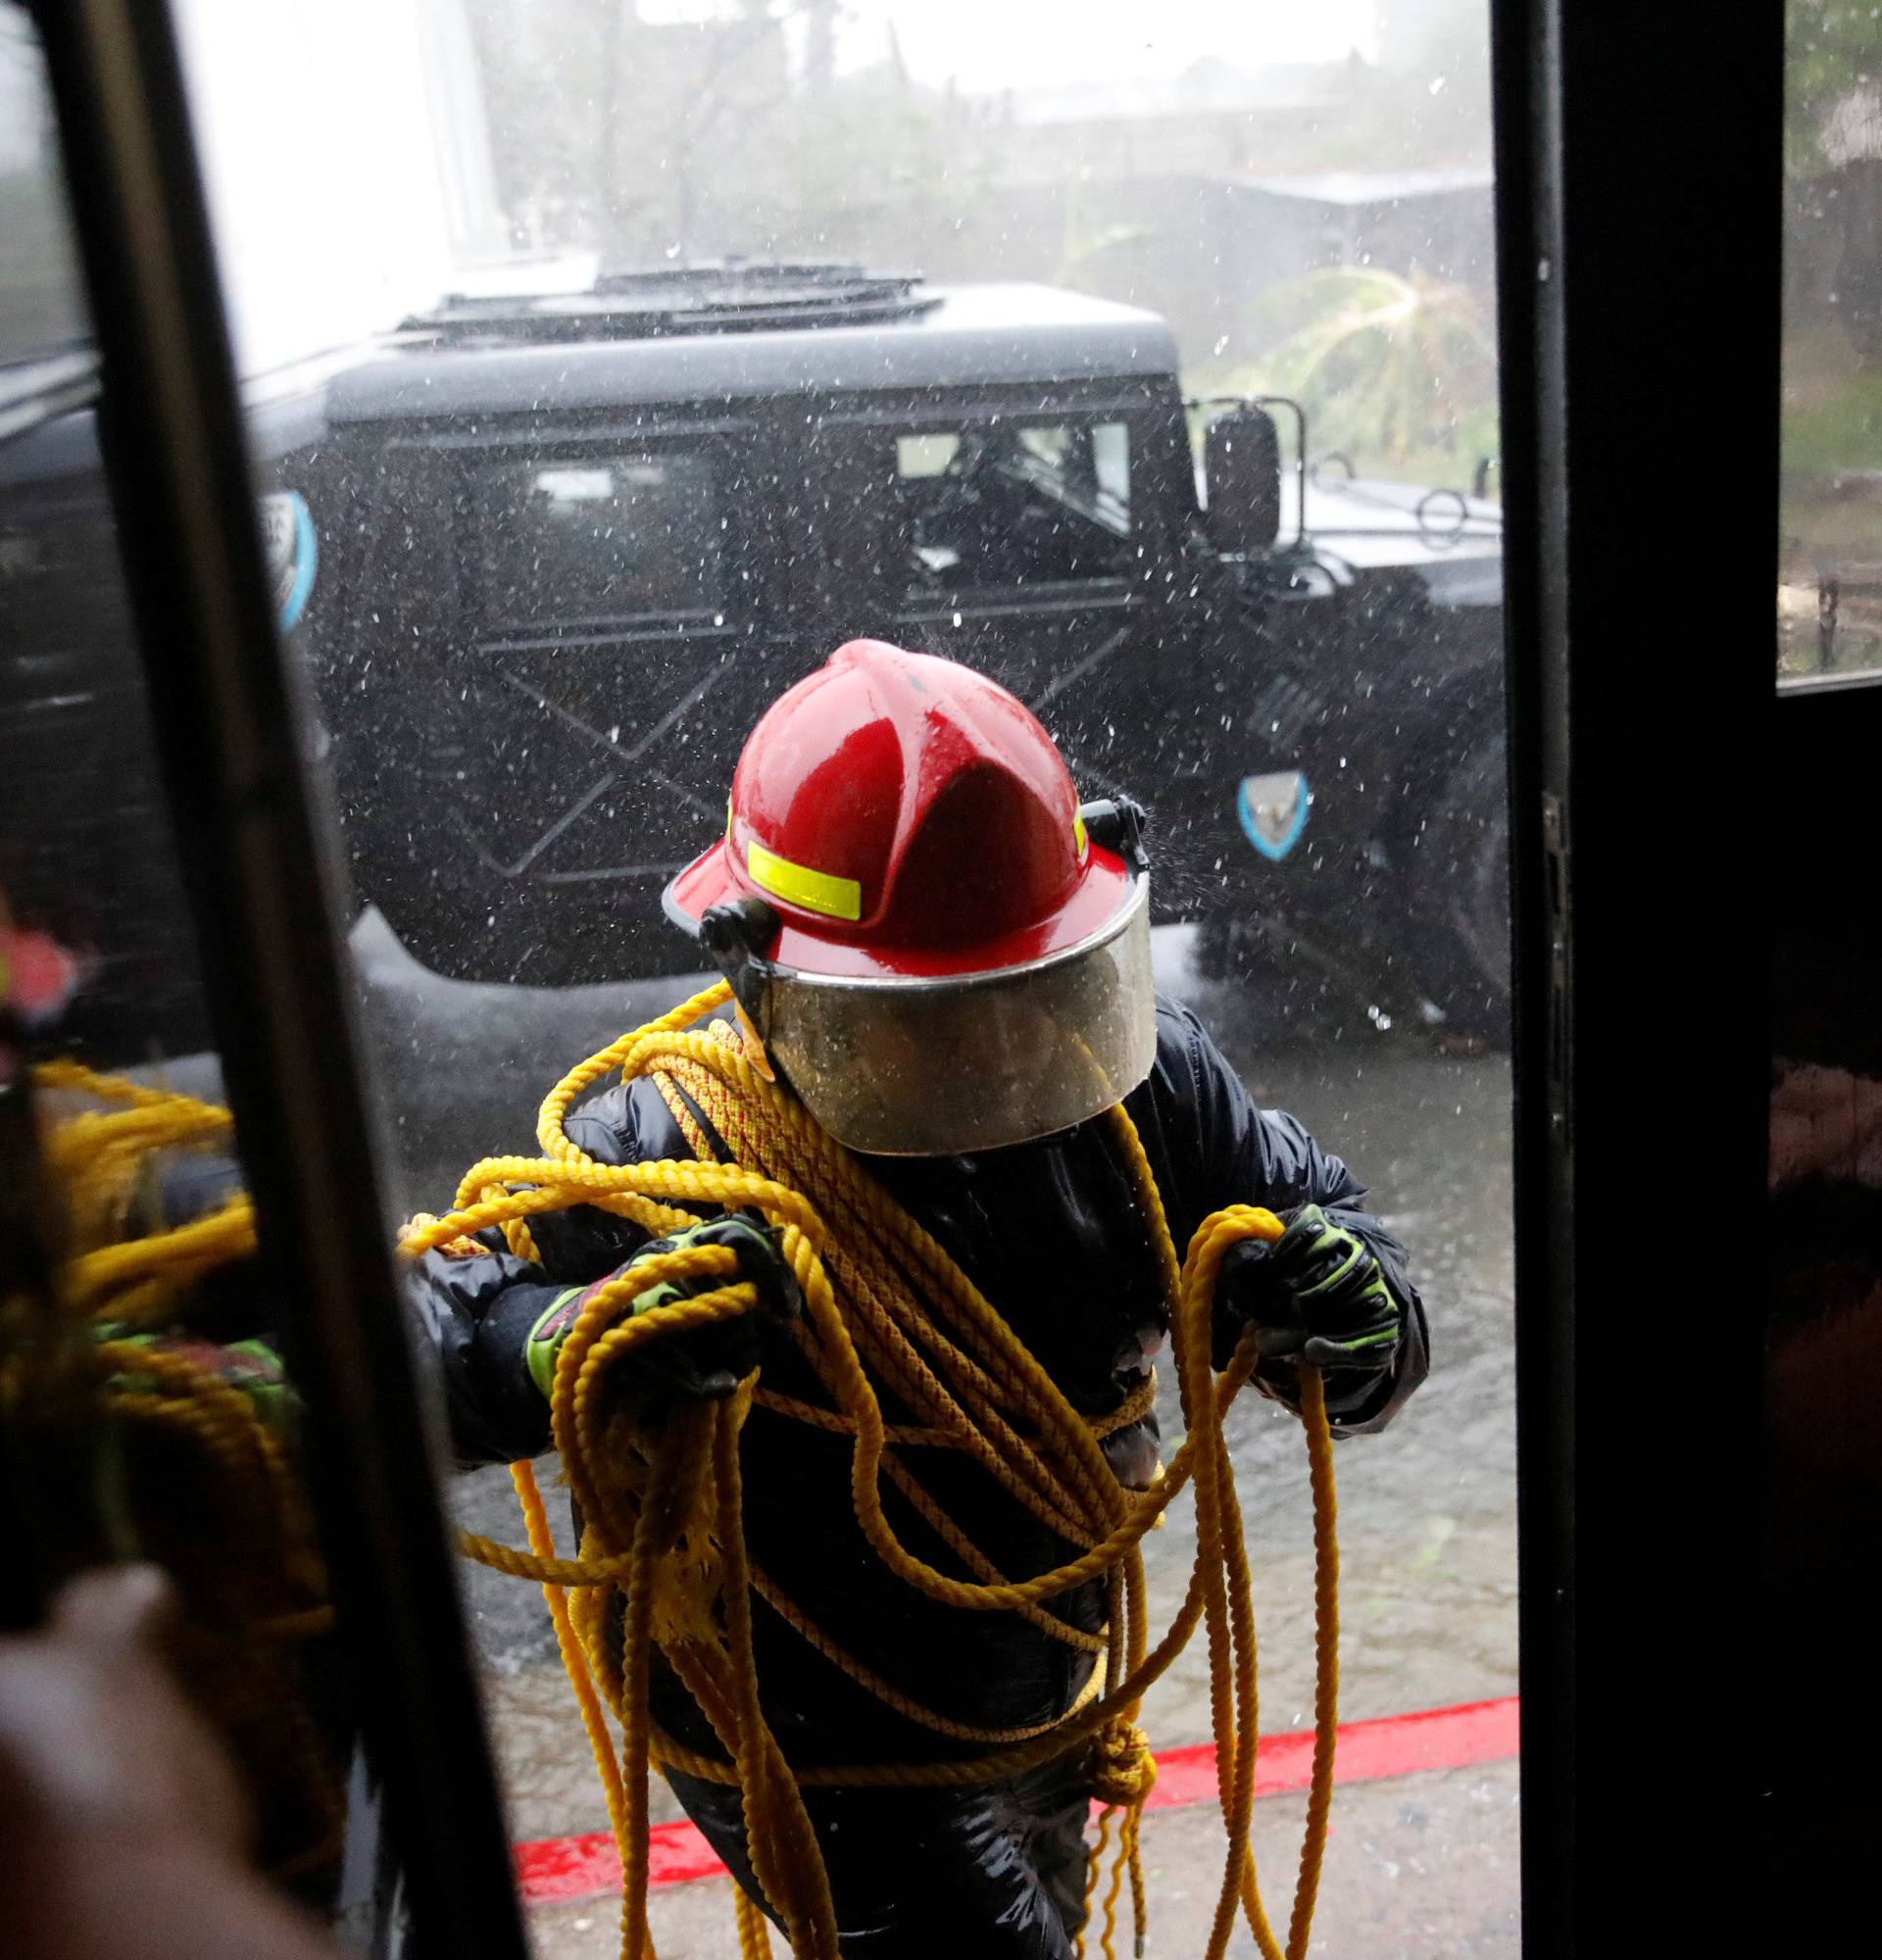 A rescue worker enters in to the Emergency Operation Centre after the area was hit by Hurricane Maria in Guayama